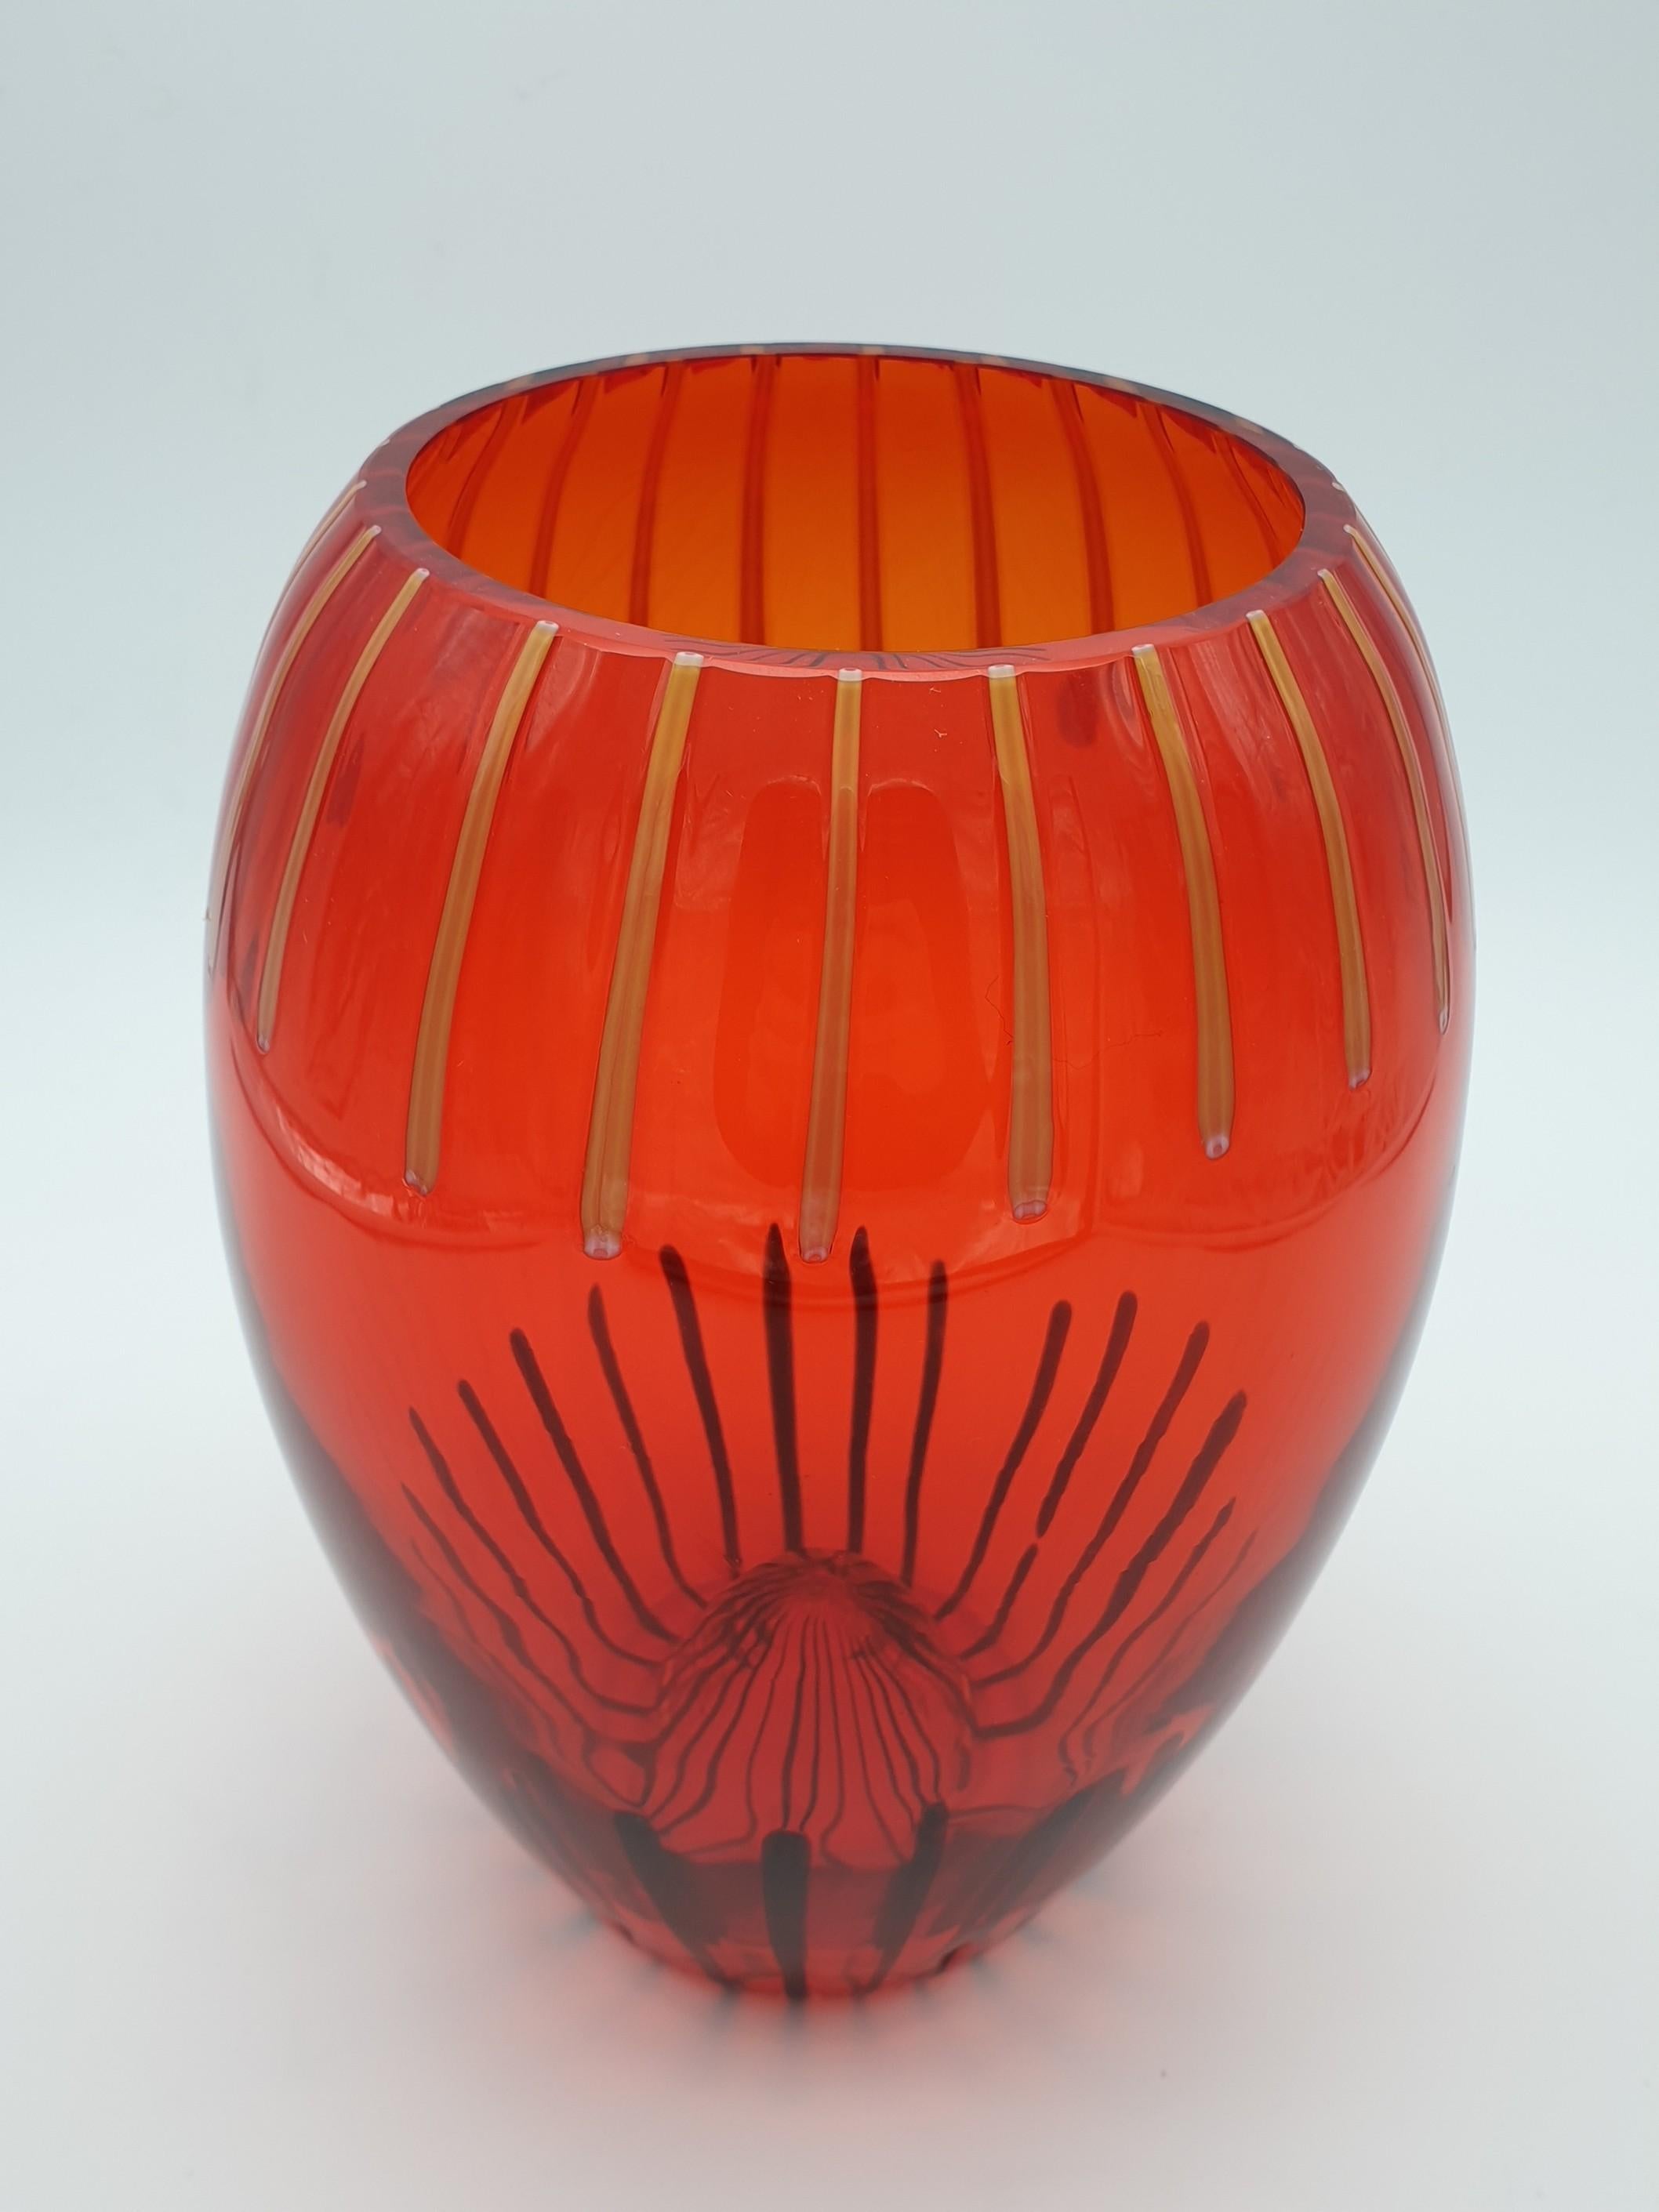 A bongo-drum shaped glass vase, handmade in Murano by Gino Cenedese e Figlio in the late 1990s. Both the bright red color and the contrasting canes on its edges (amber on the top and black on the bottom) recall to memory the flaming sunsets of